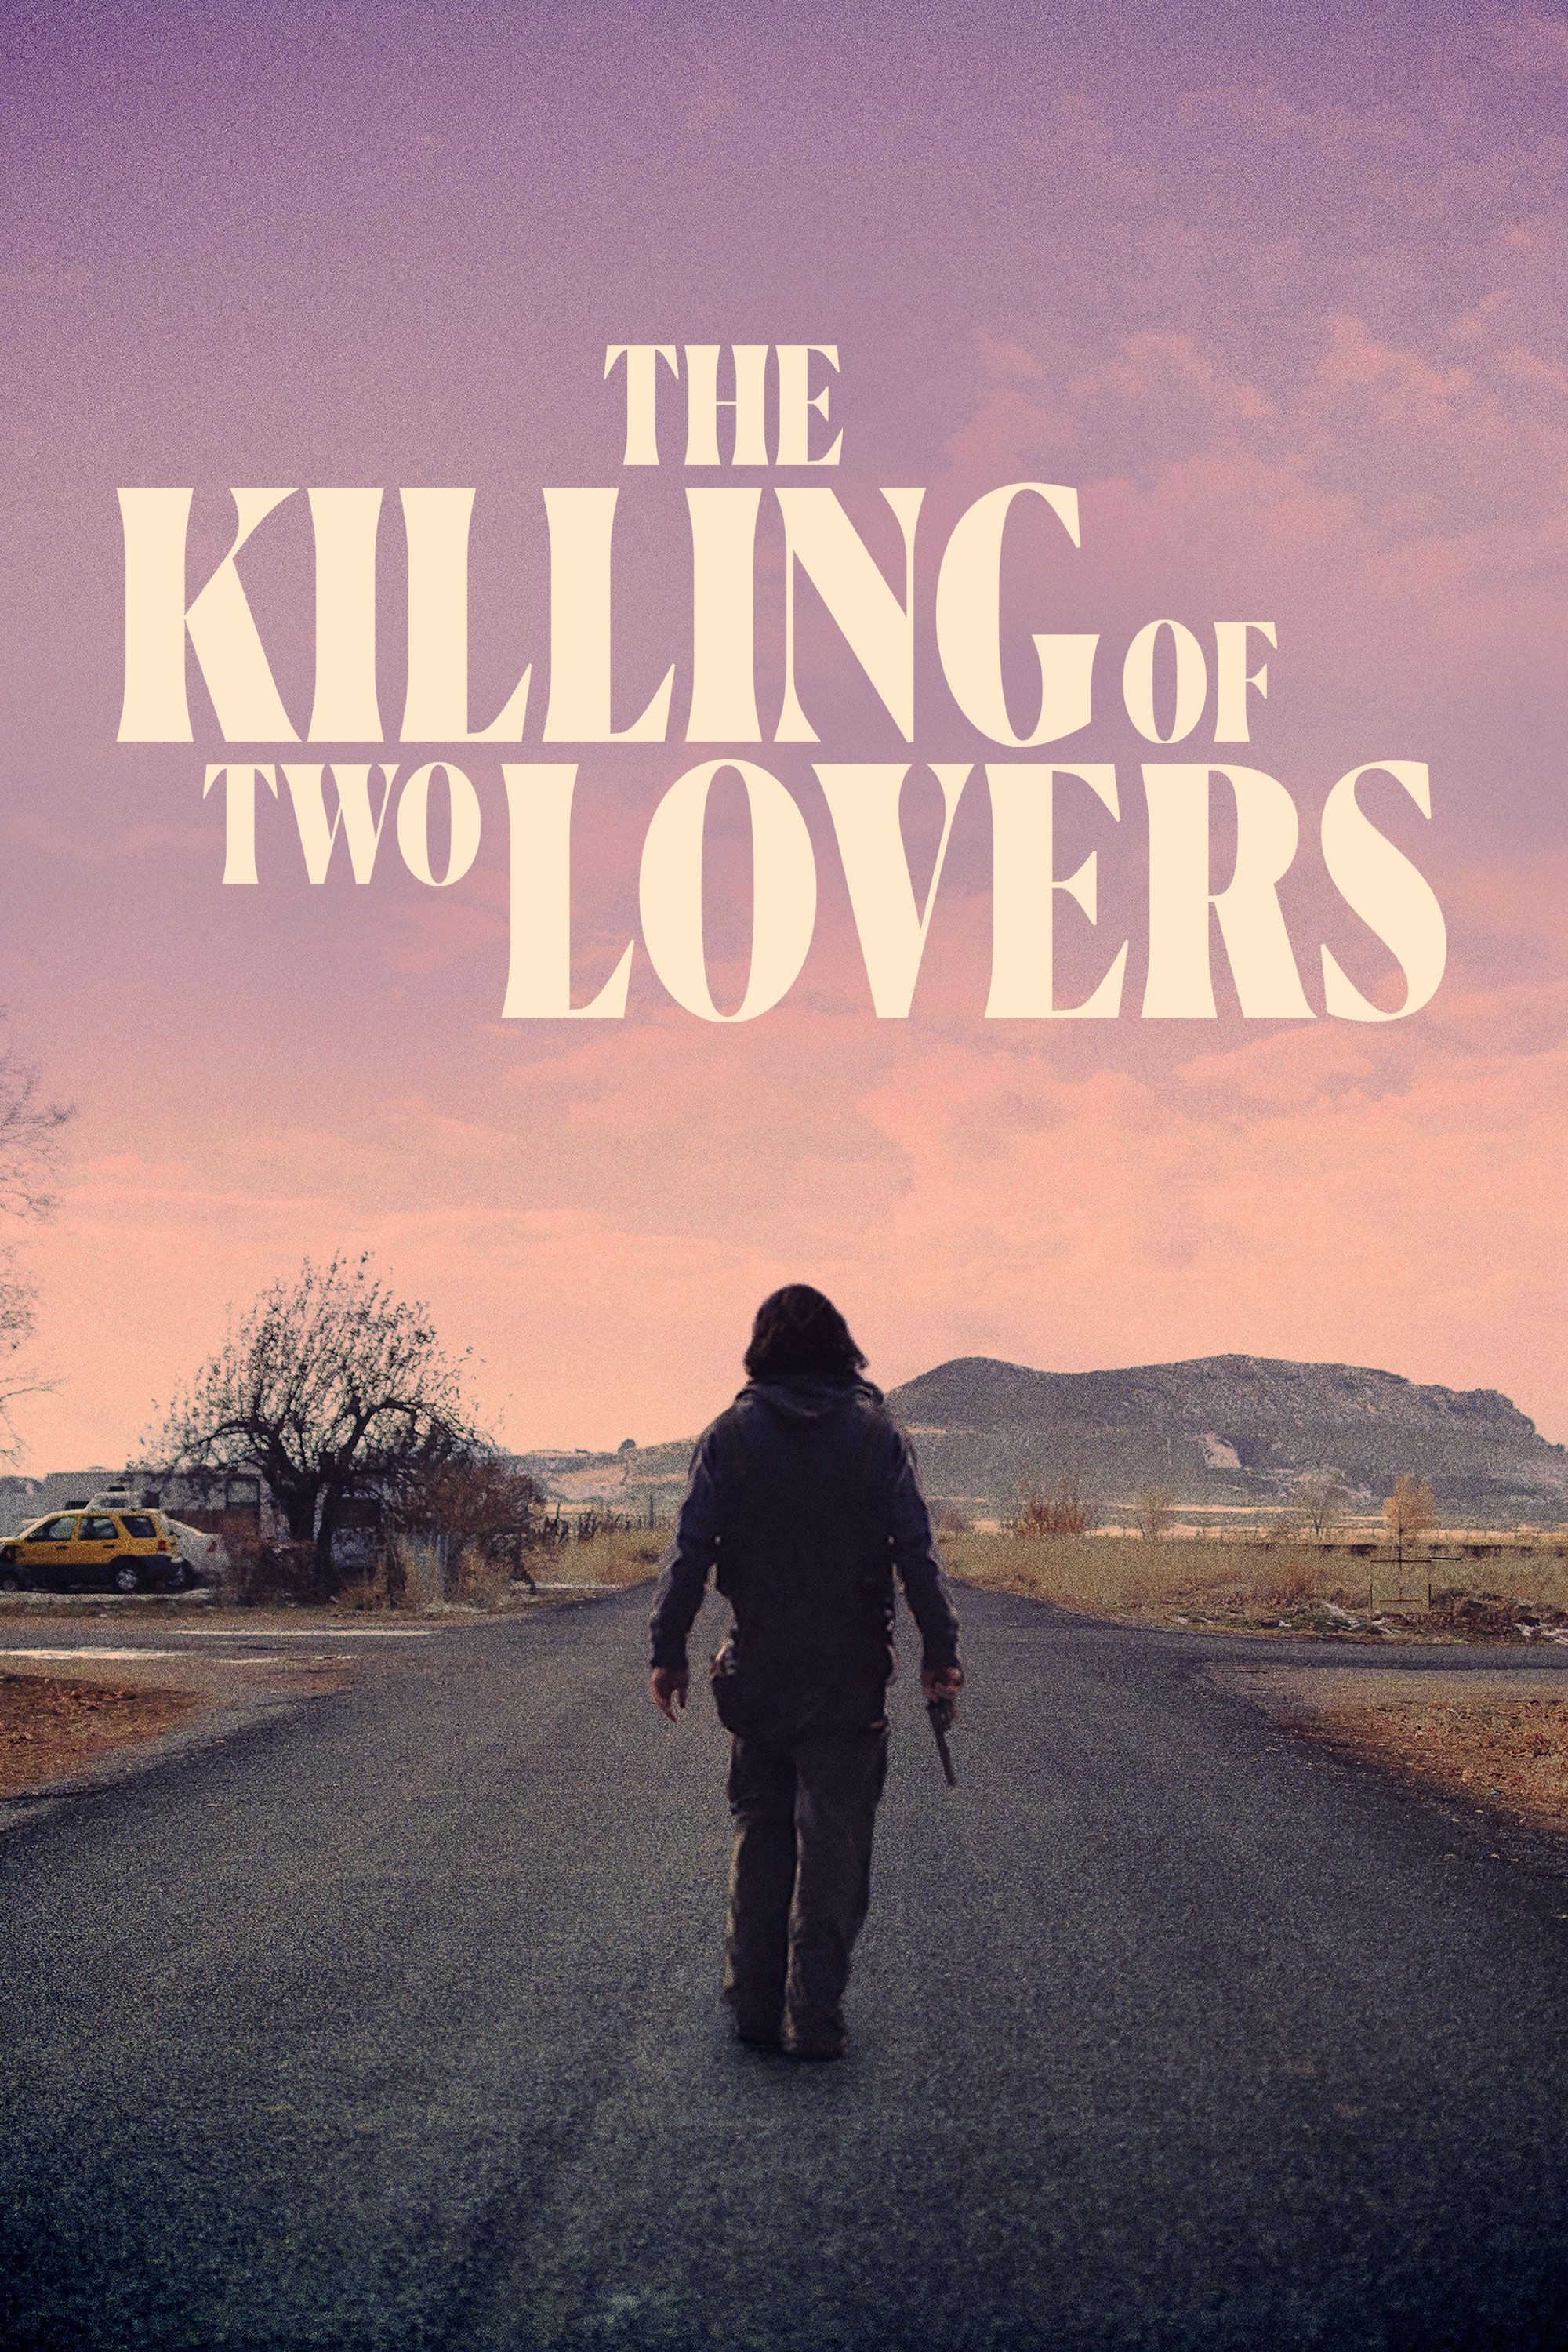 The Killing of Two Lovers, Indie movie, Relationship drama, Tense storyline, 2000x3000 HD Handy